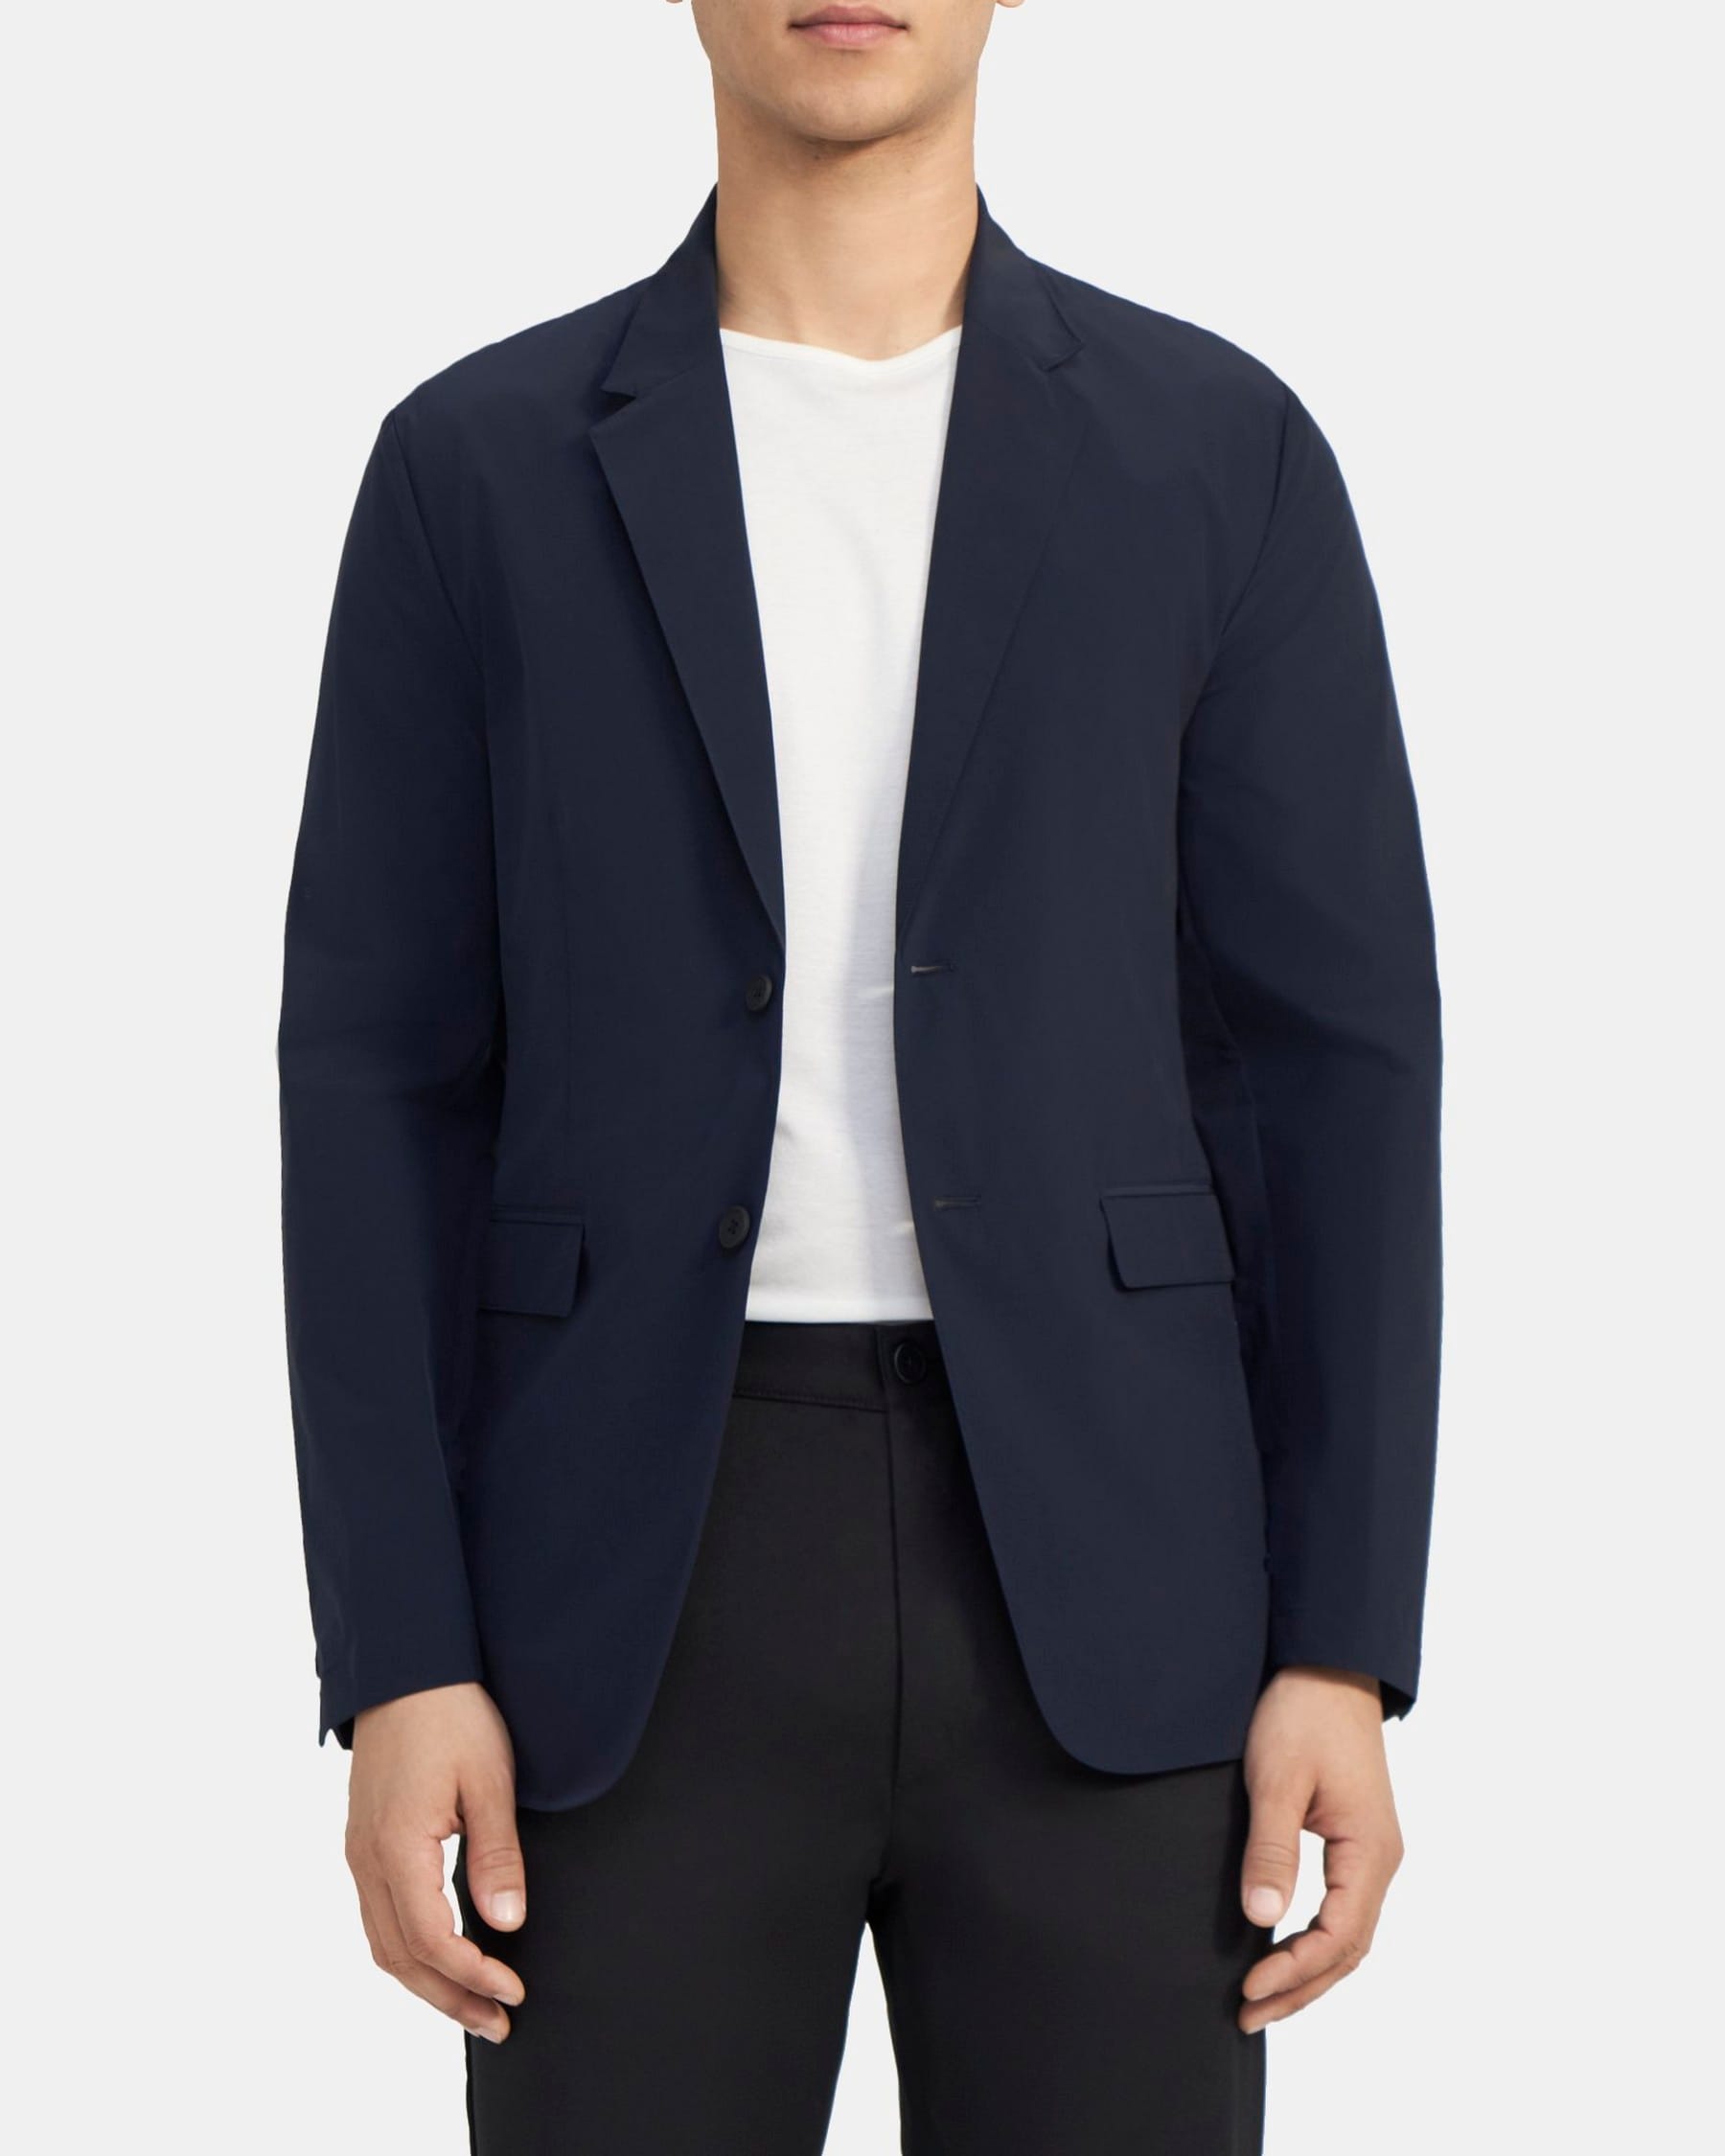 Theory Packable Blazer in Nylon Blend